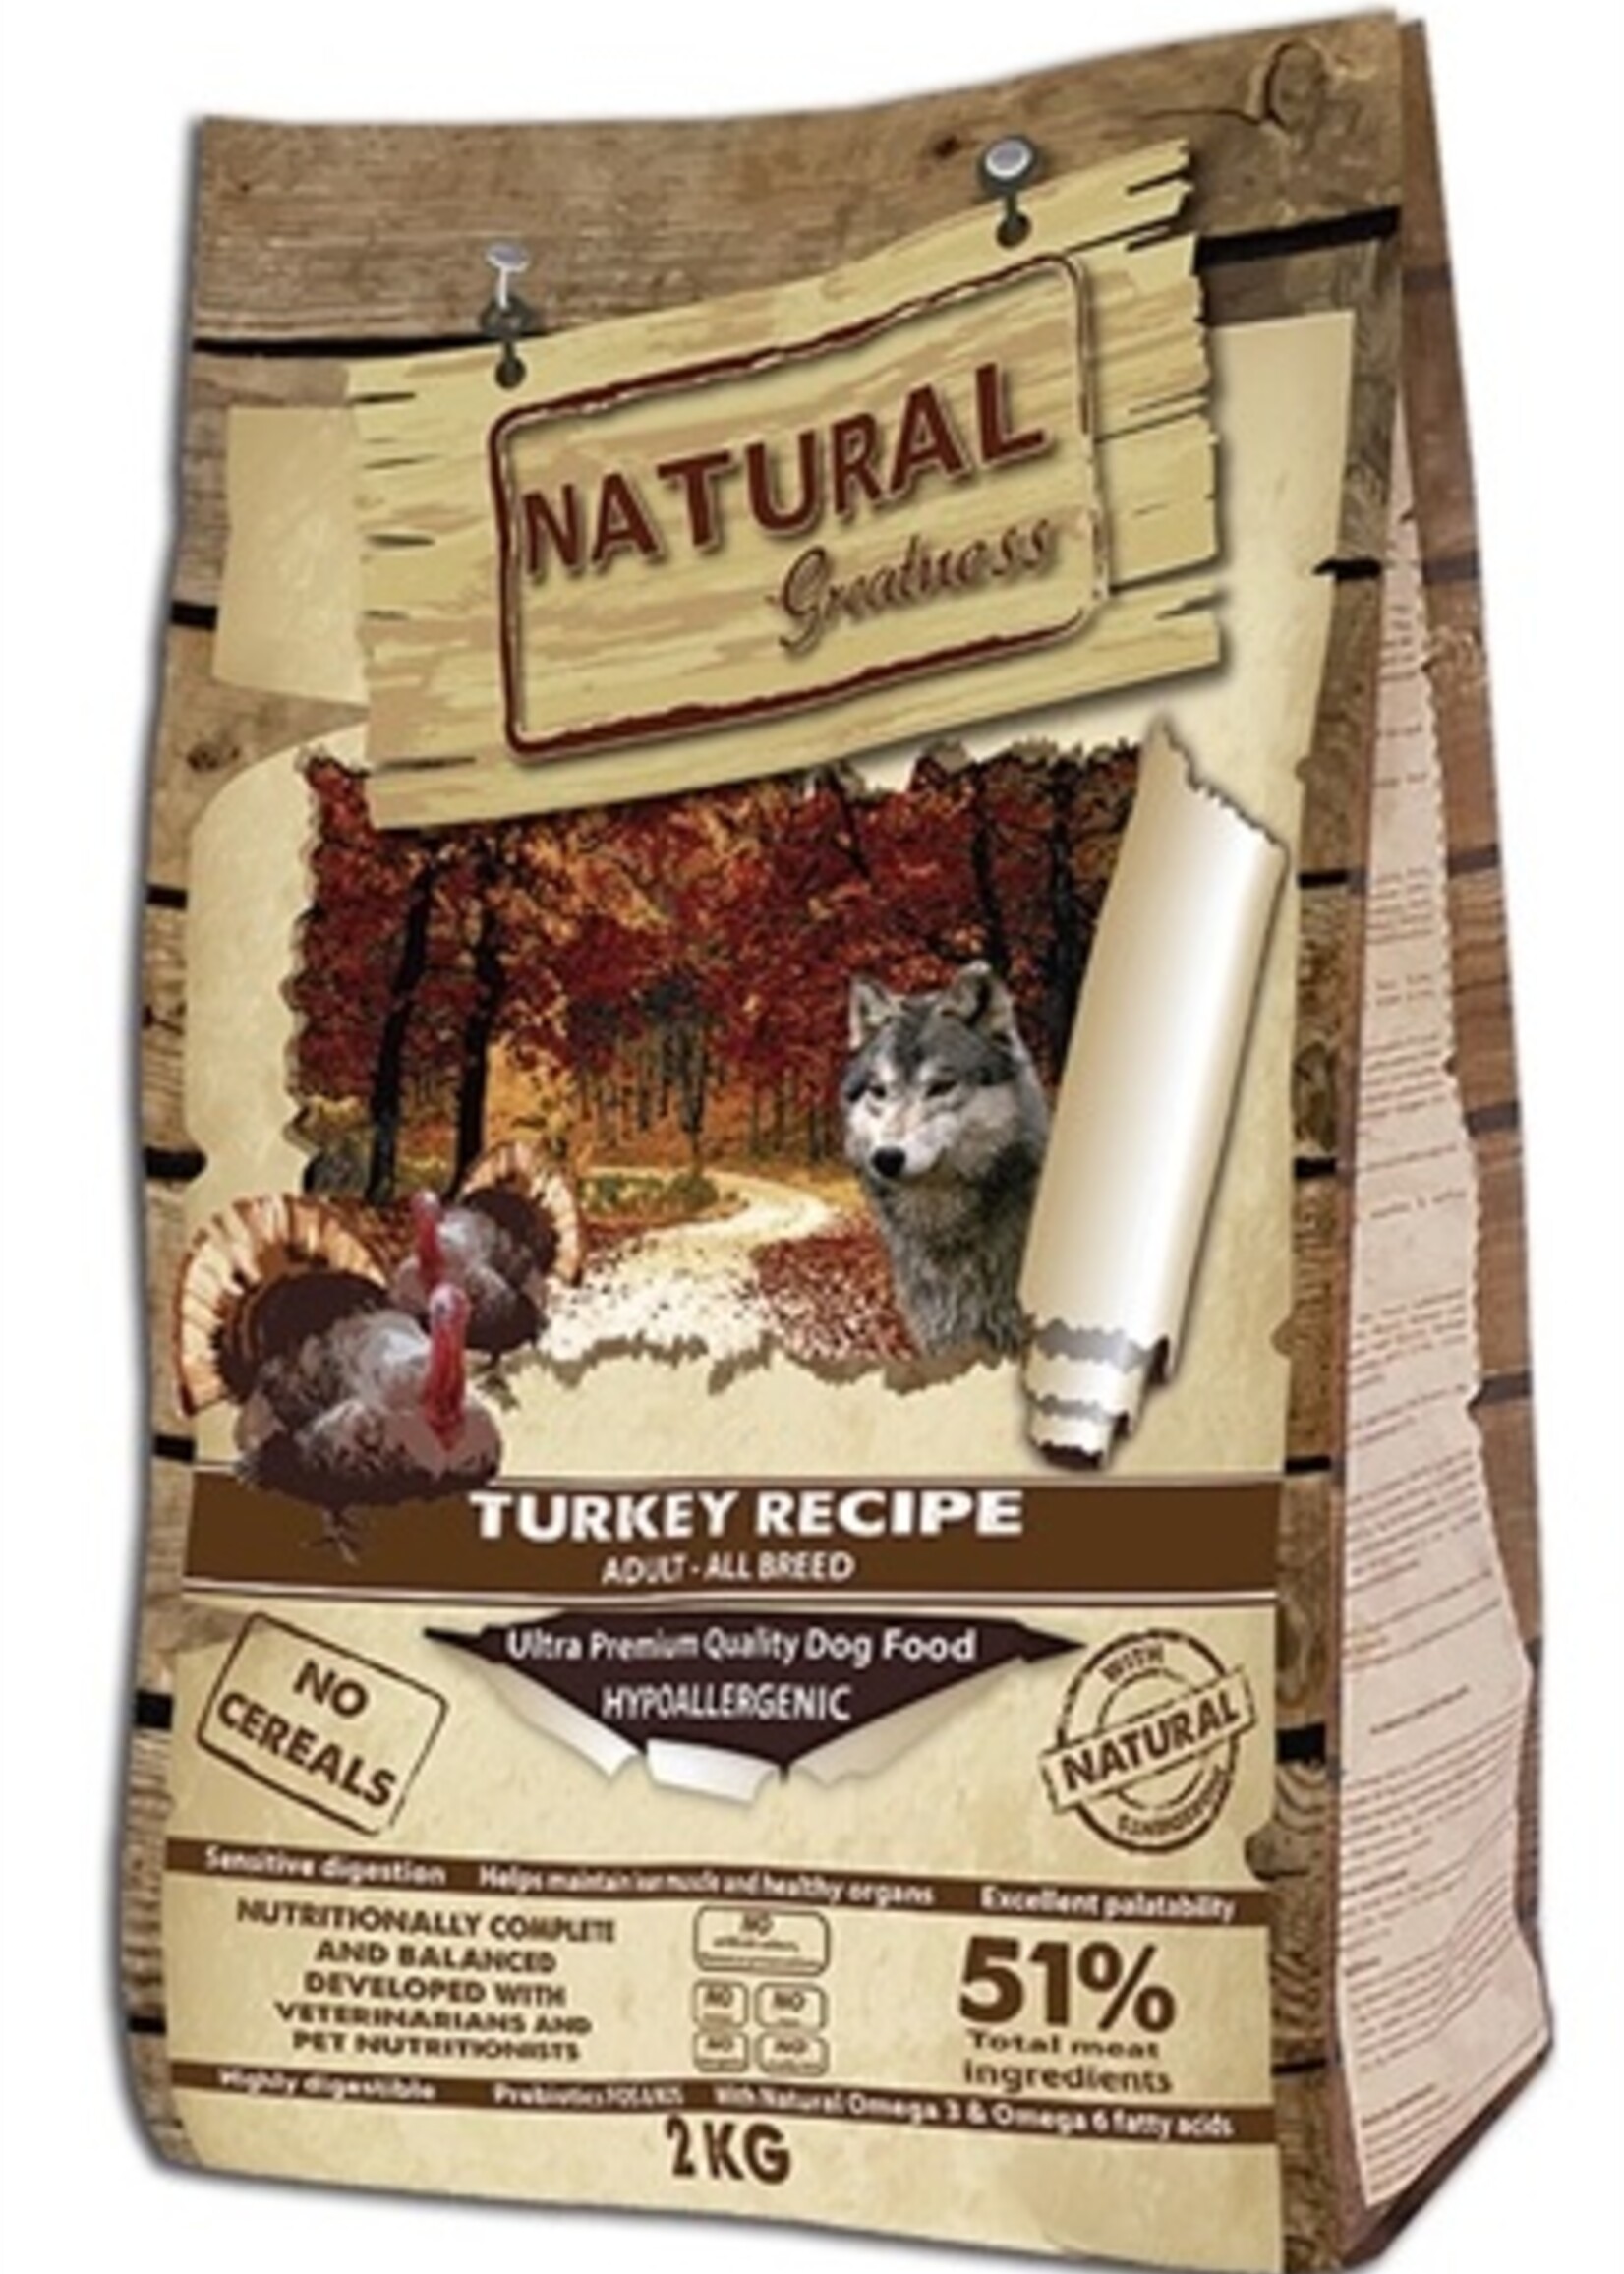 Natural greatness Natural greatness turkey recipe